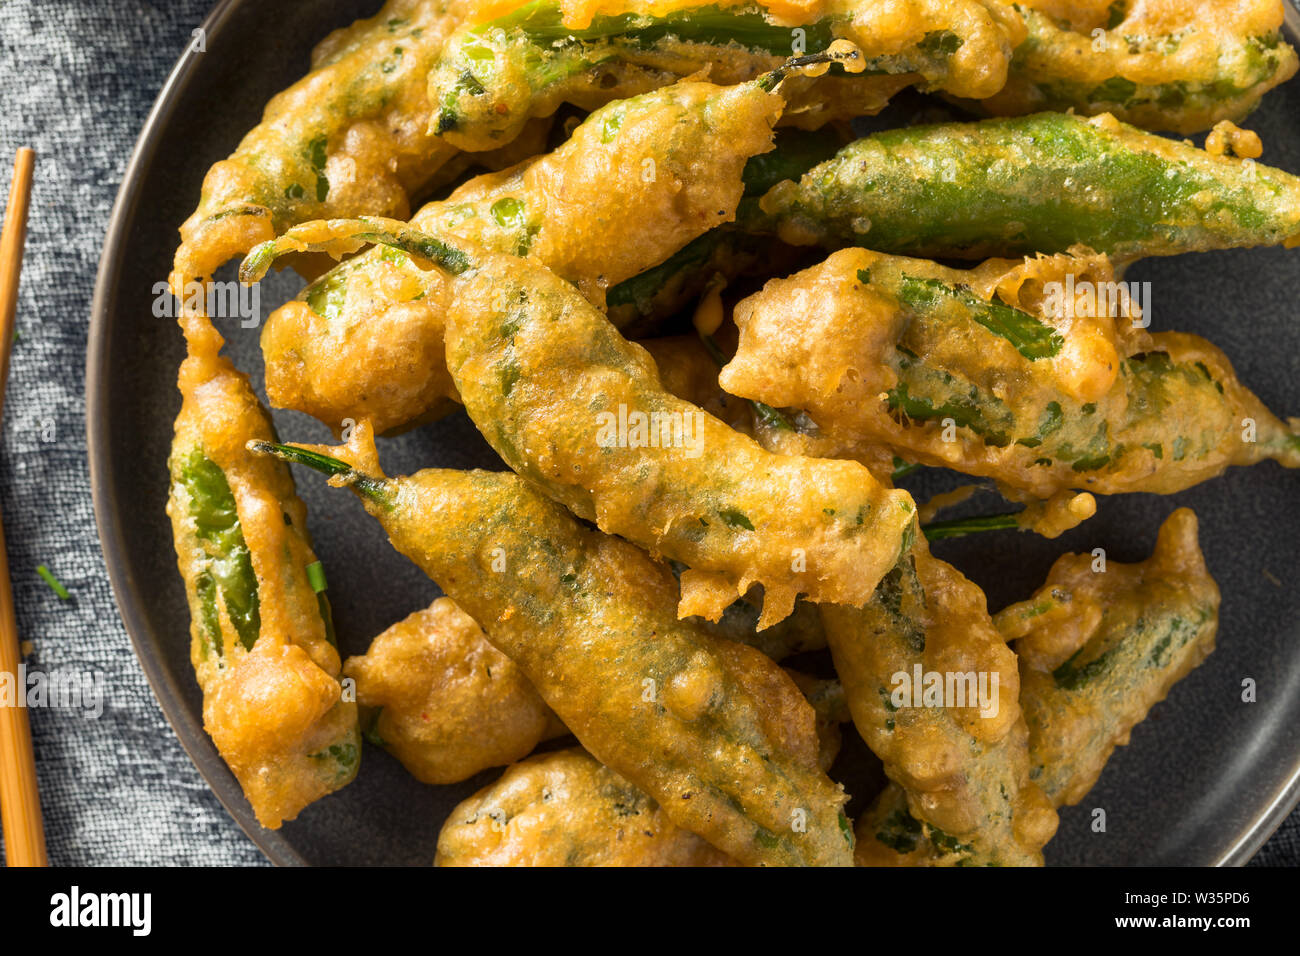 Homemade Deep Fried Shishito Peppers with Sauce Stock Photo